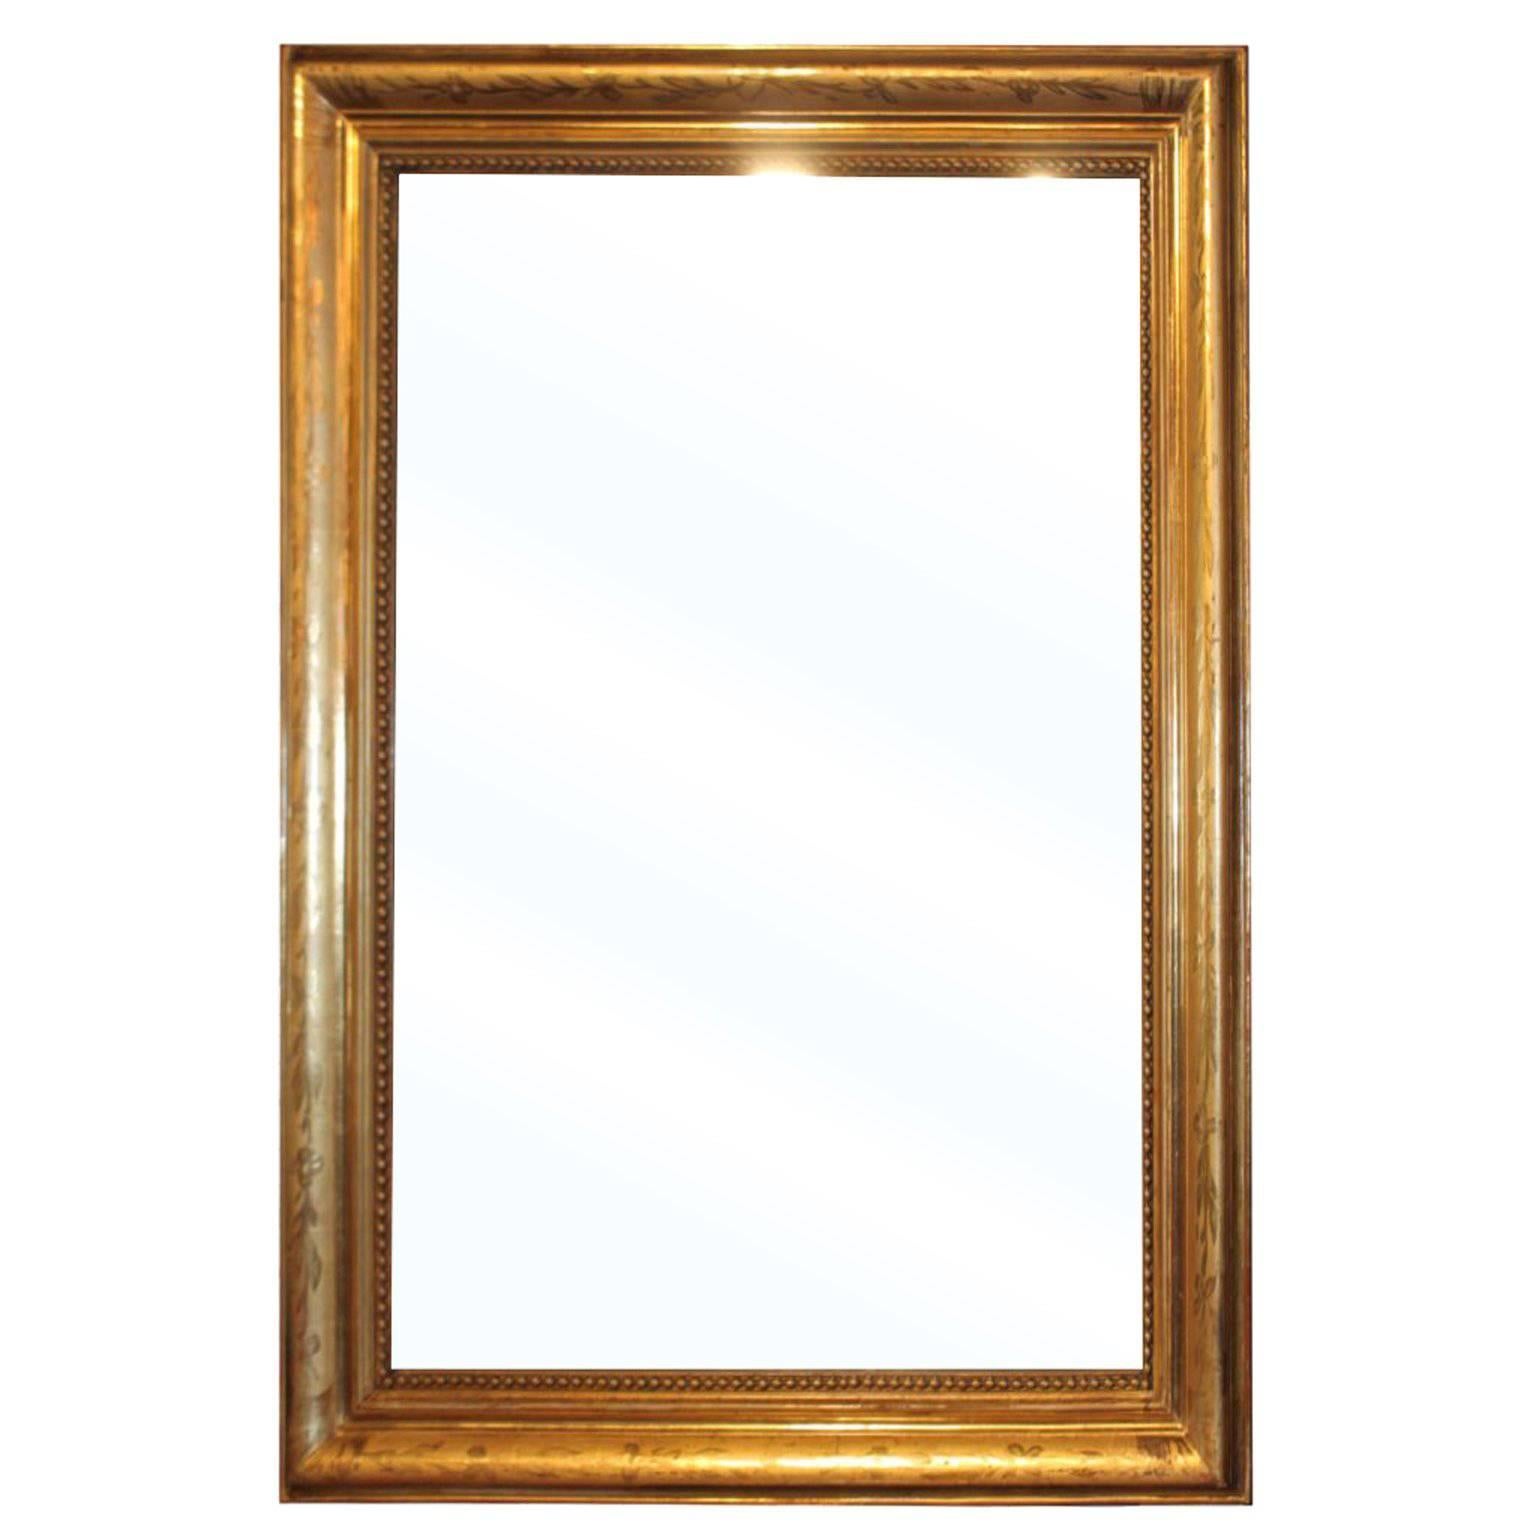 French Rectangular Giltwood Mirror with Etched Motifs and Beads